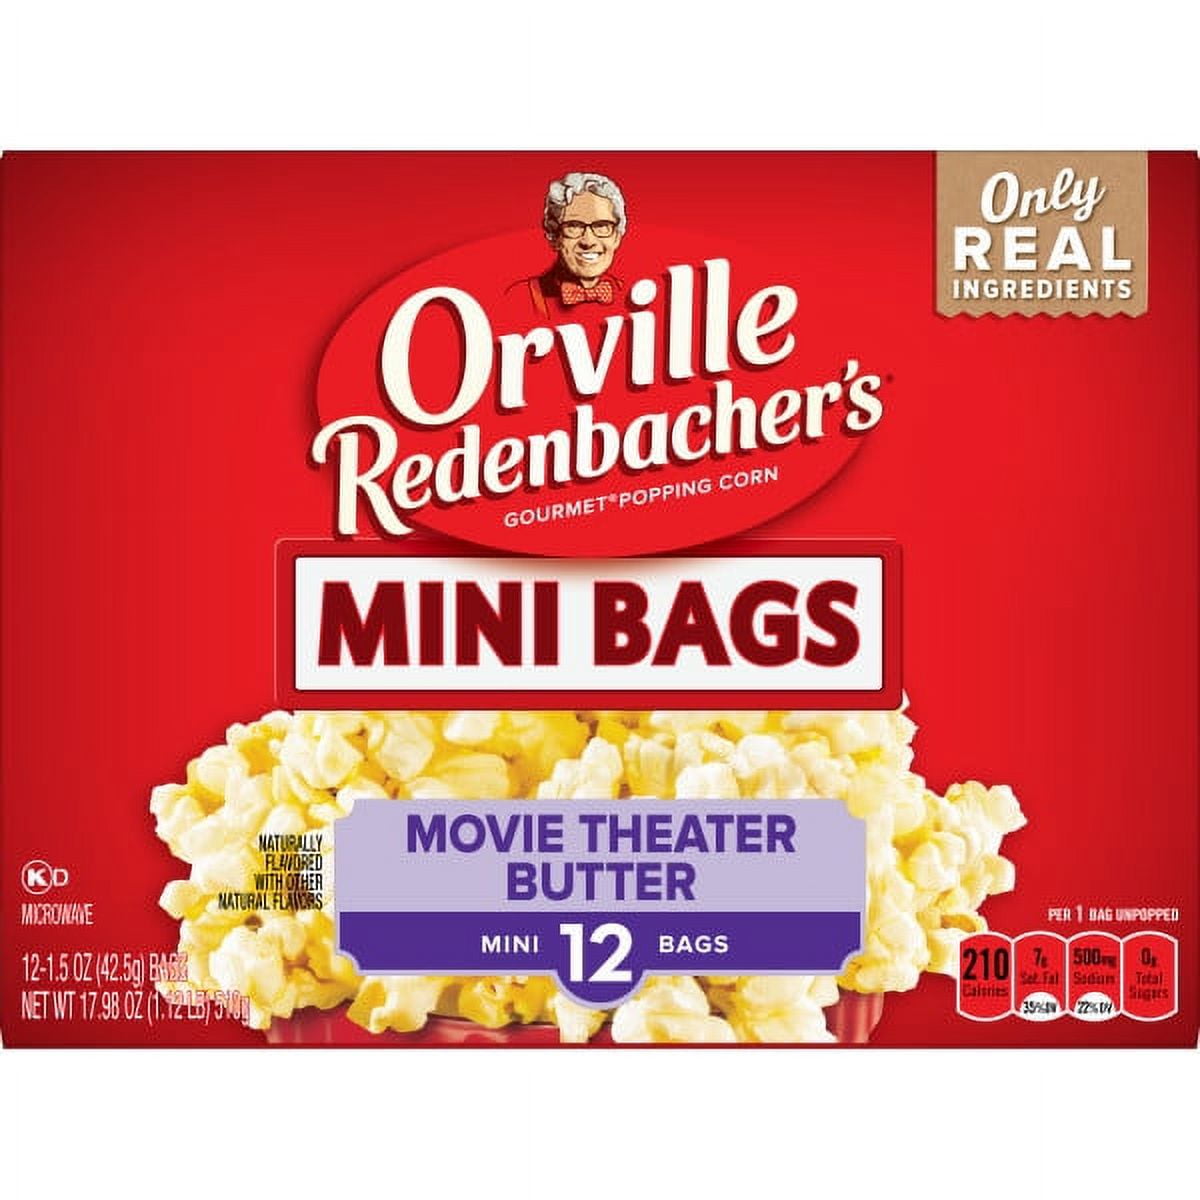 Orville Redenbacher's Movie Theater Butter Microwave Popcorn, Mini Bags, 1.5 Oz, 12 Ct